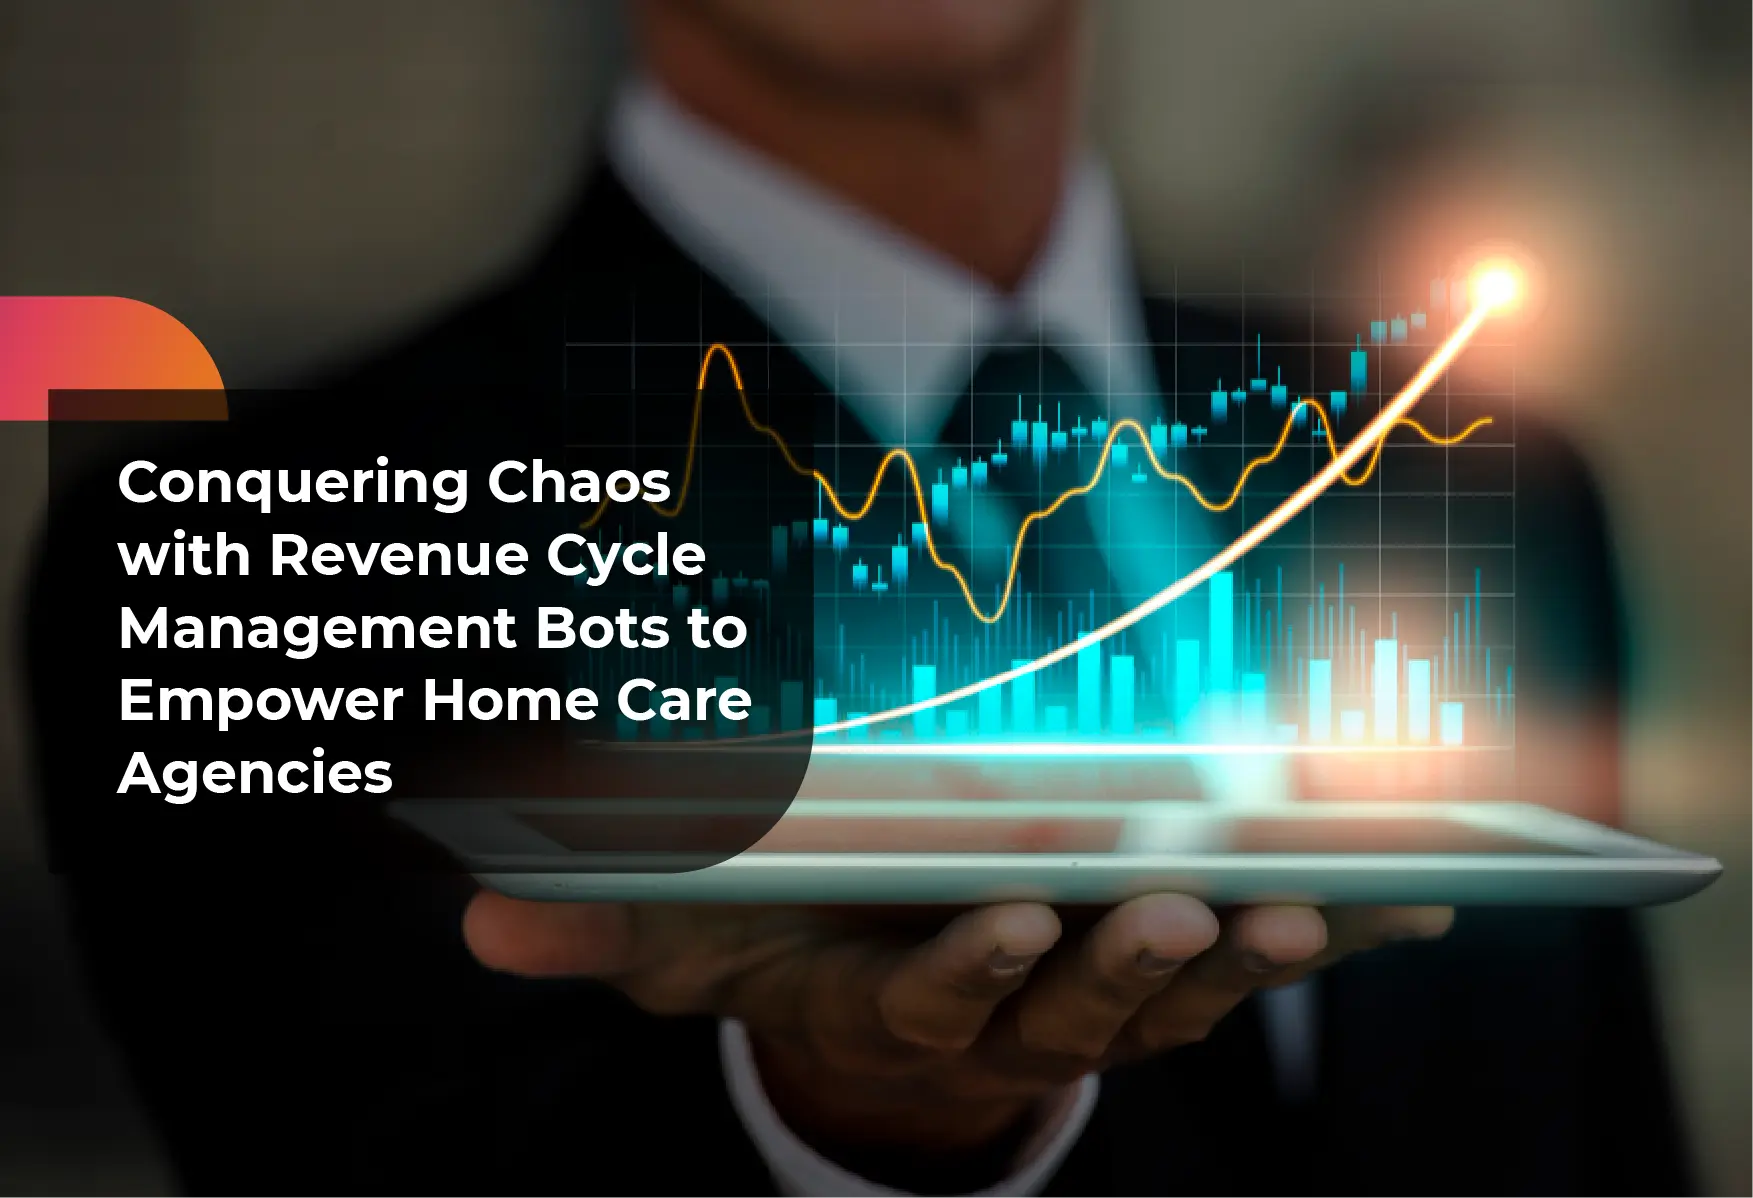 Conquering Chaos with Revenue Cycle Management Bots to Empower Home Care Agencies